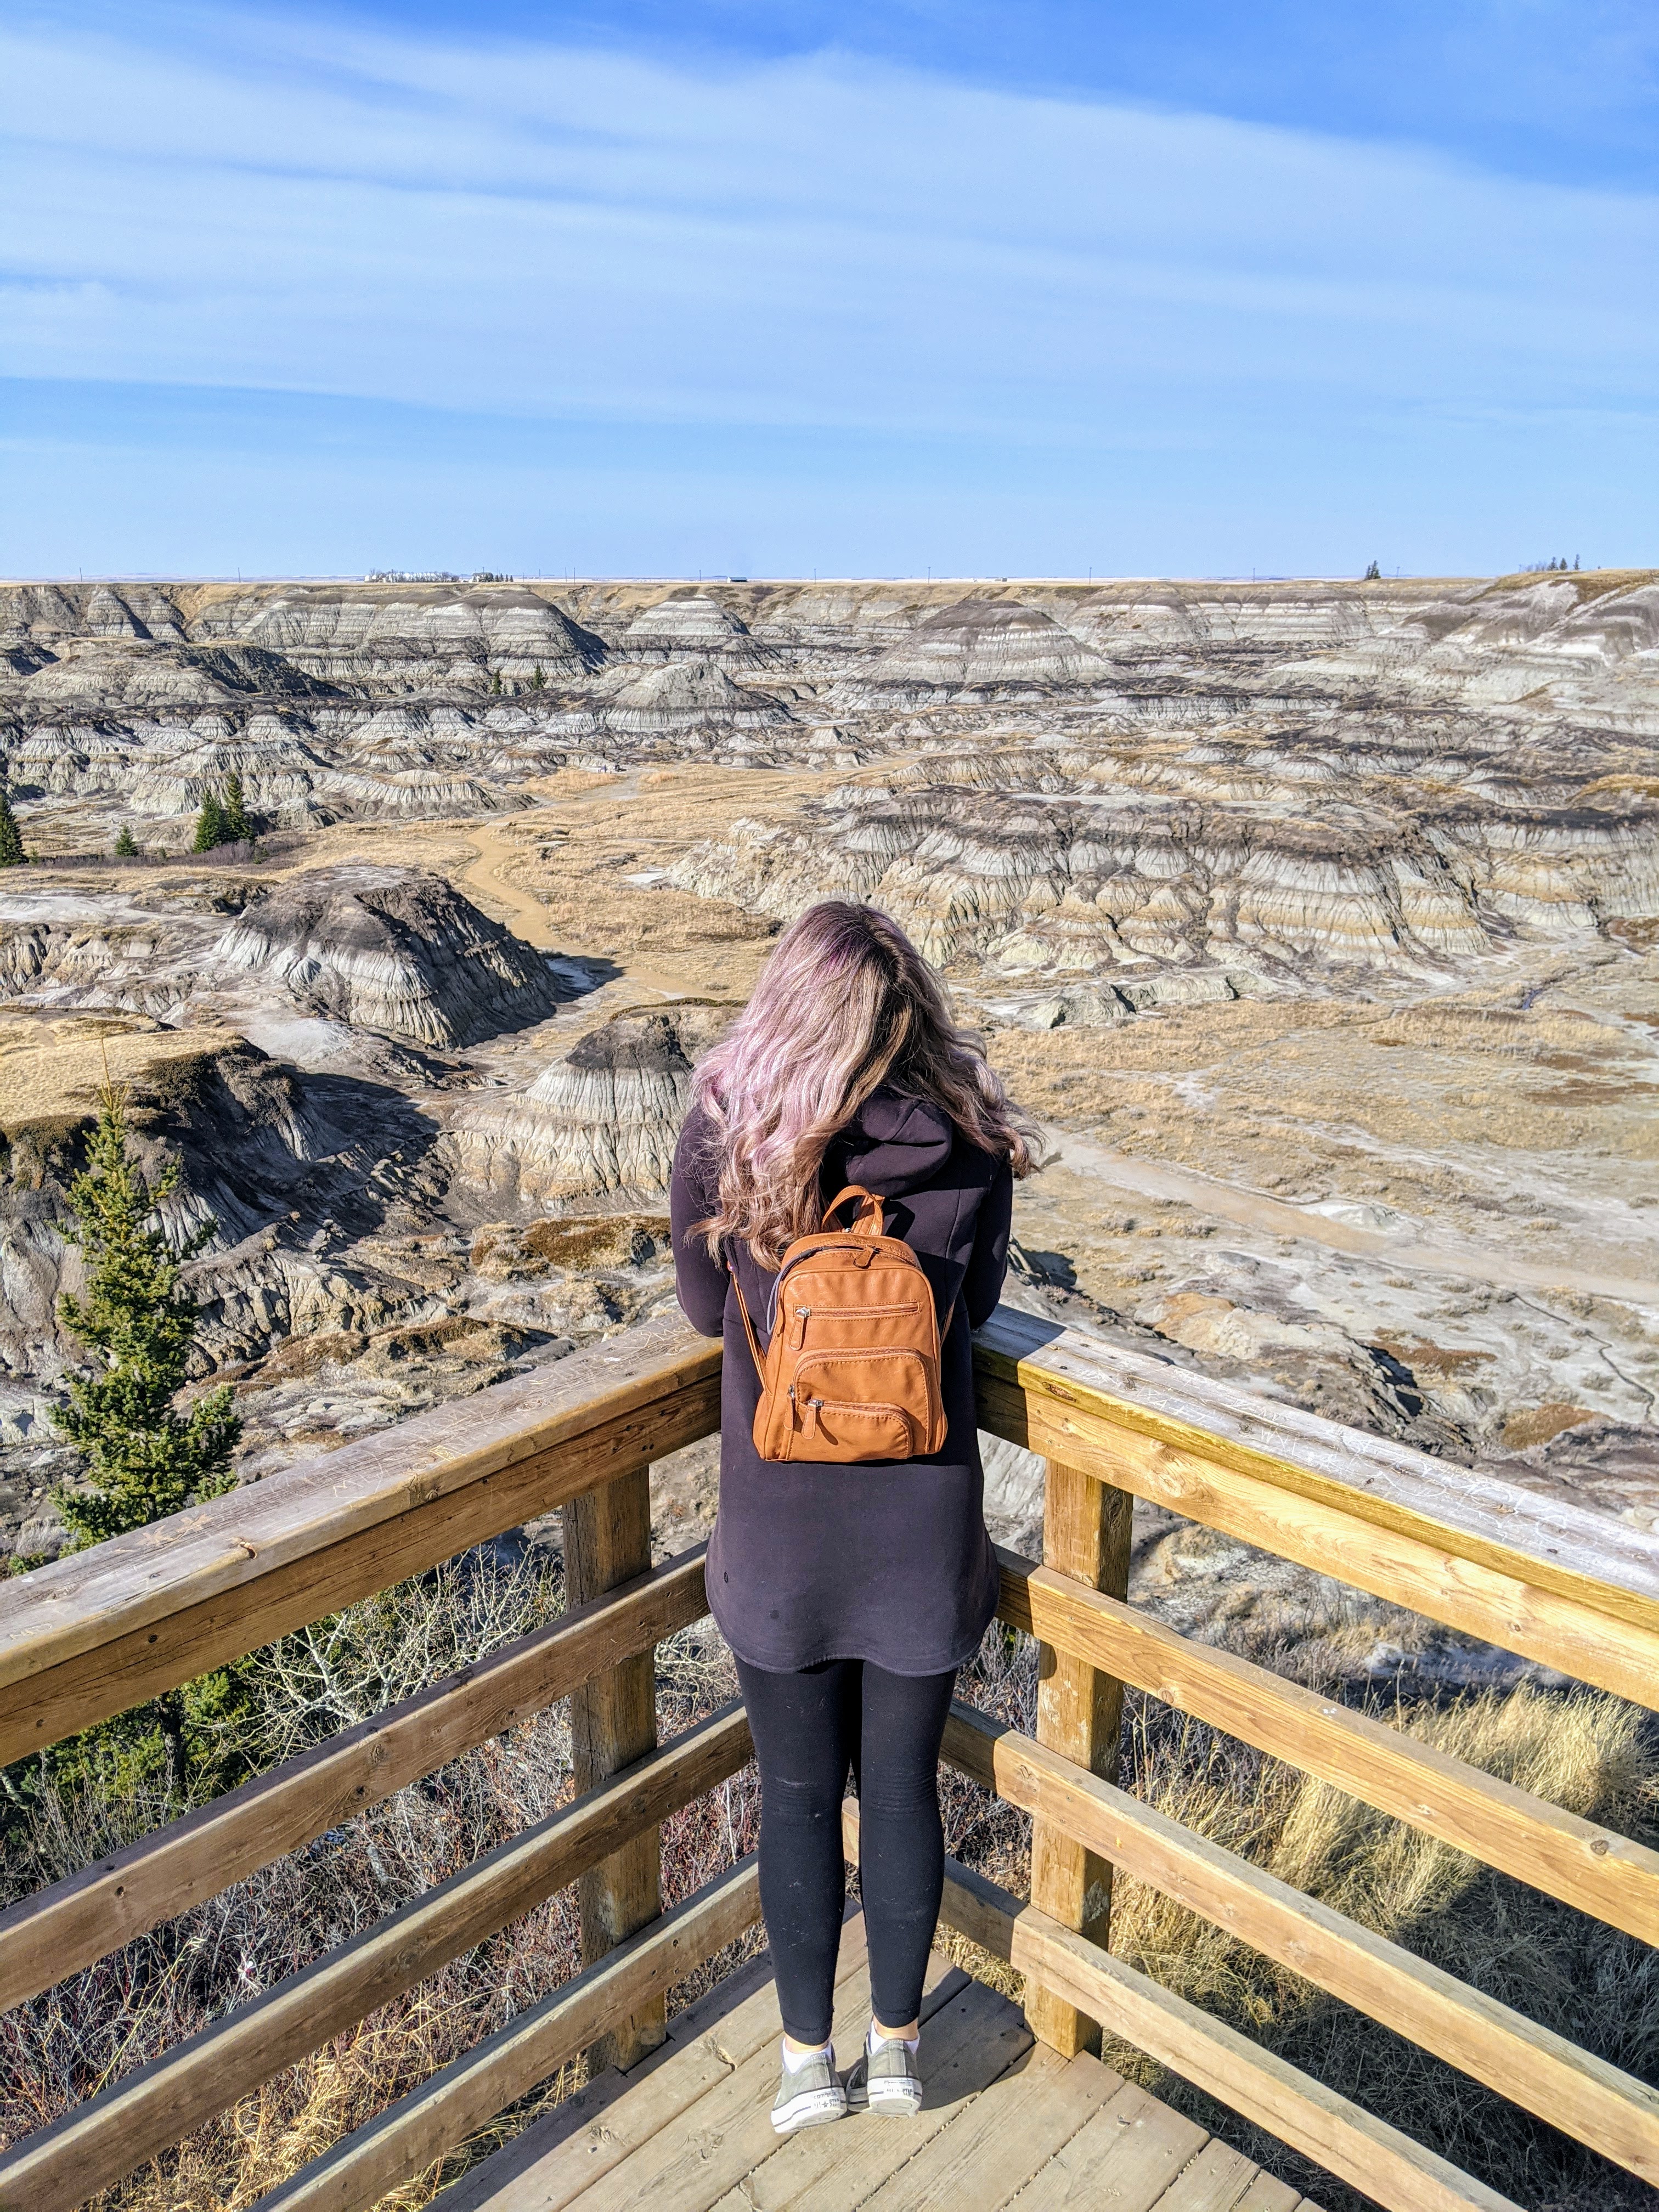 a girl stands on an observation platform overlooking a canyon